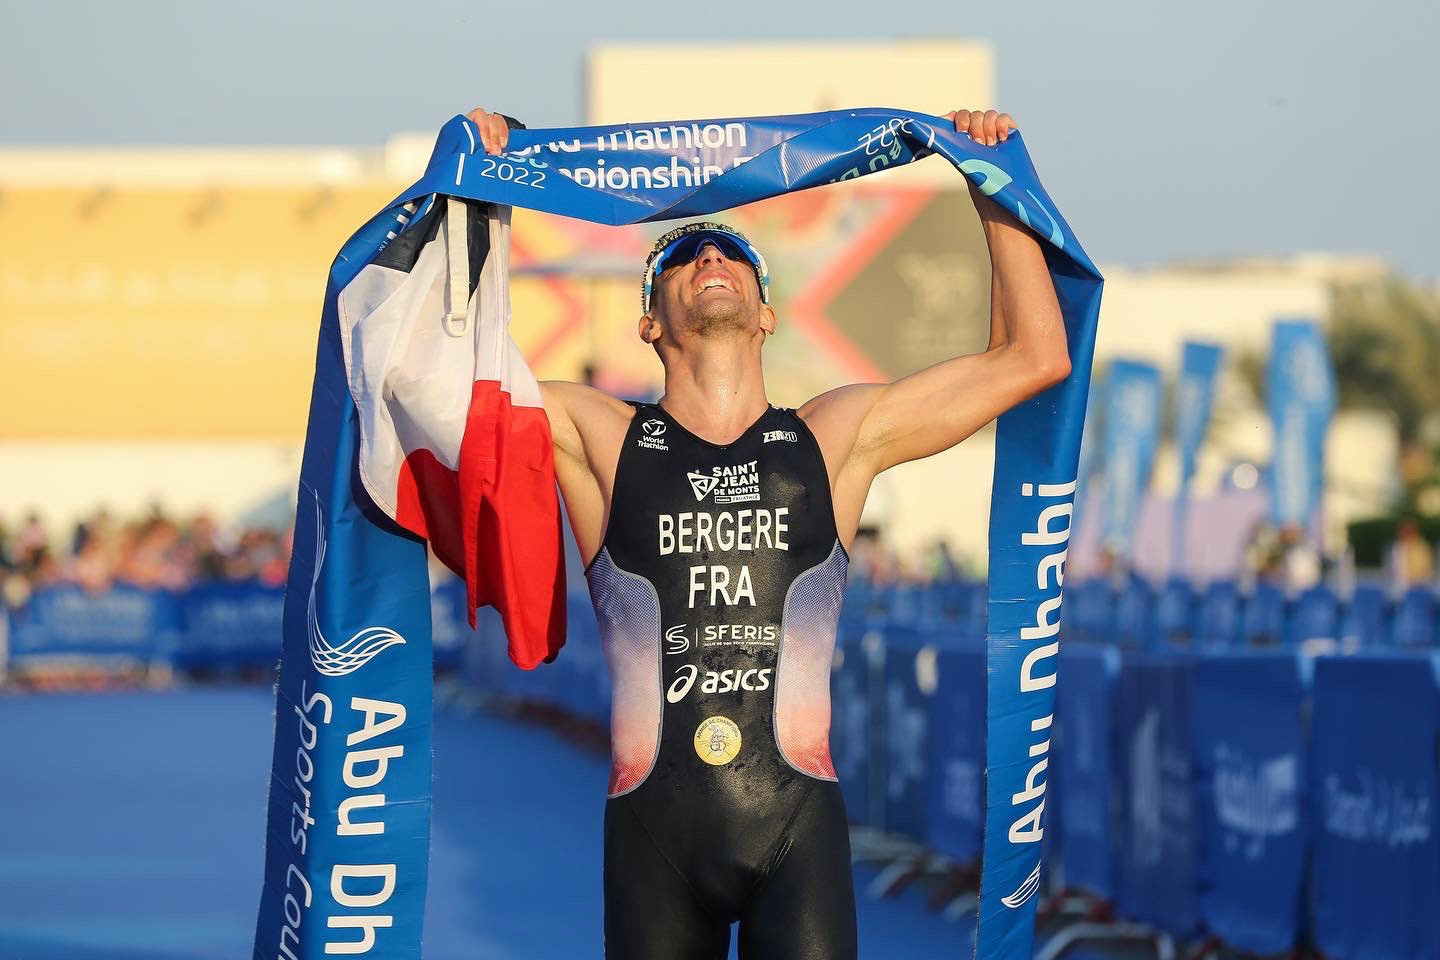 insidethegames is reporting LIVE from the 2022 World Triathlon Championship Finals in Abu Dhabi